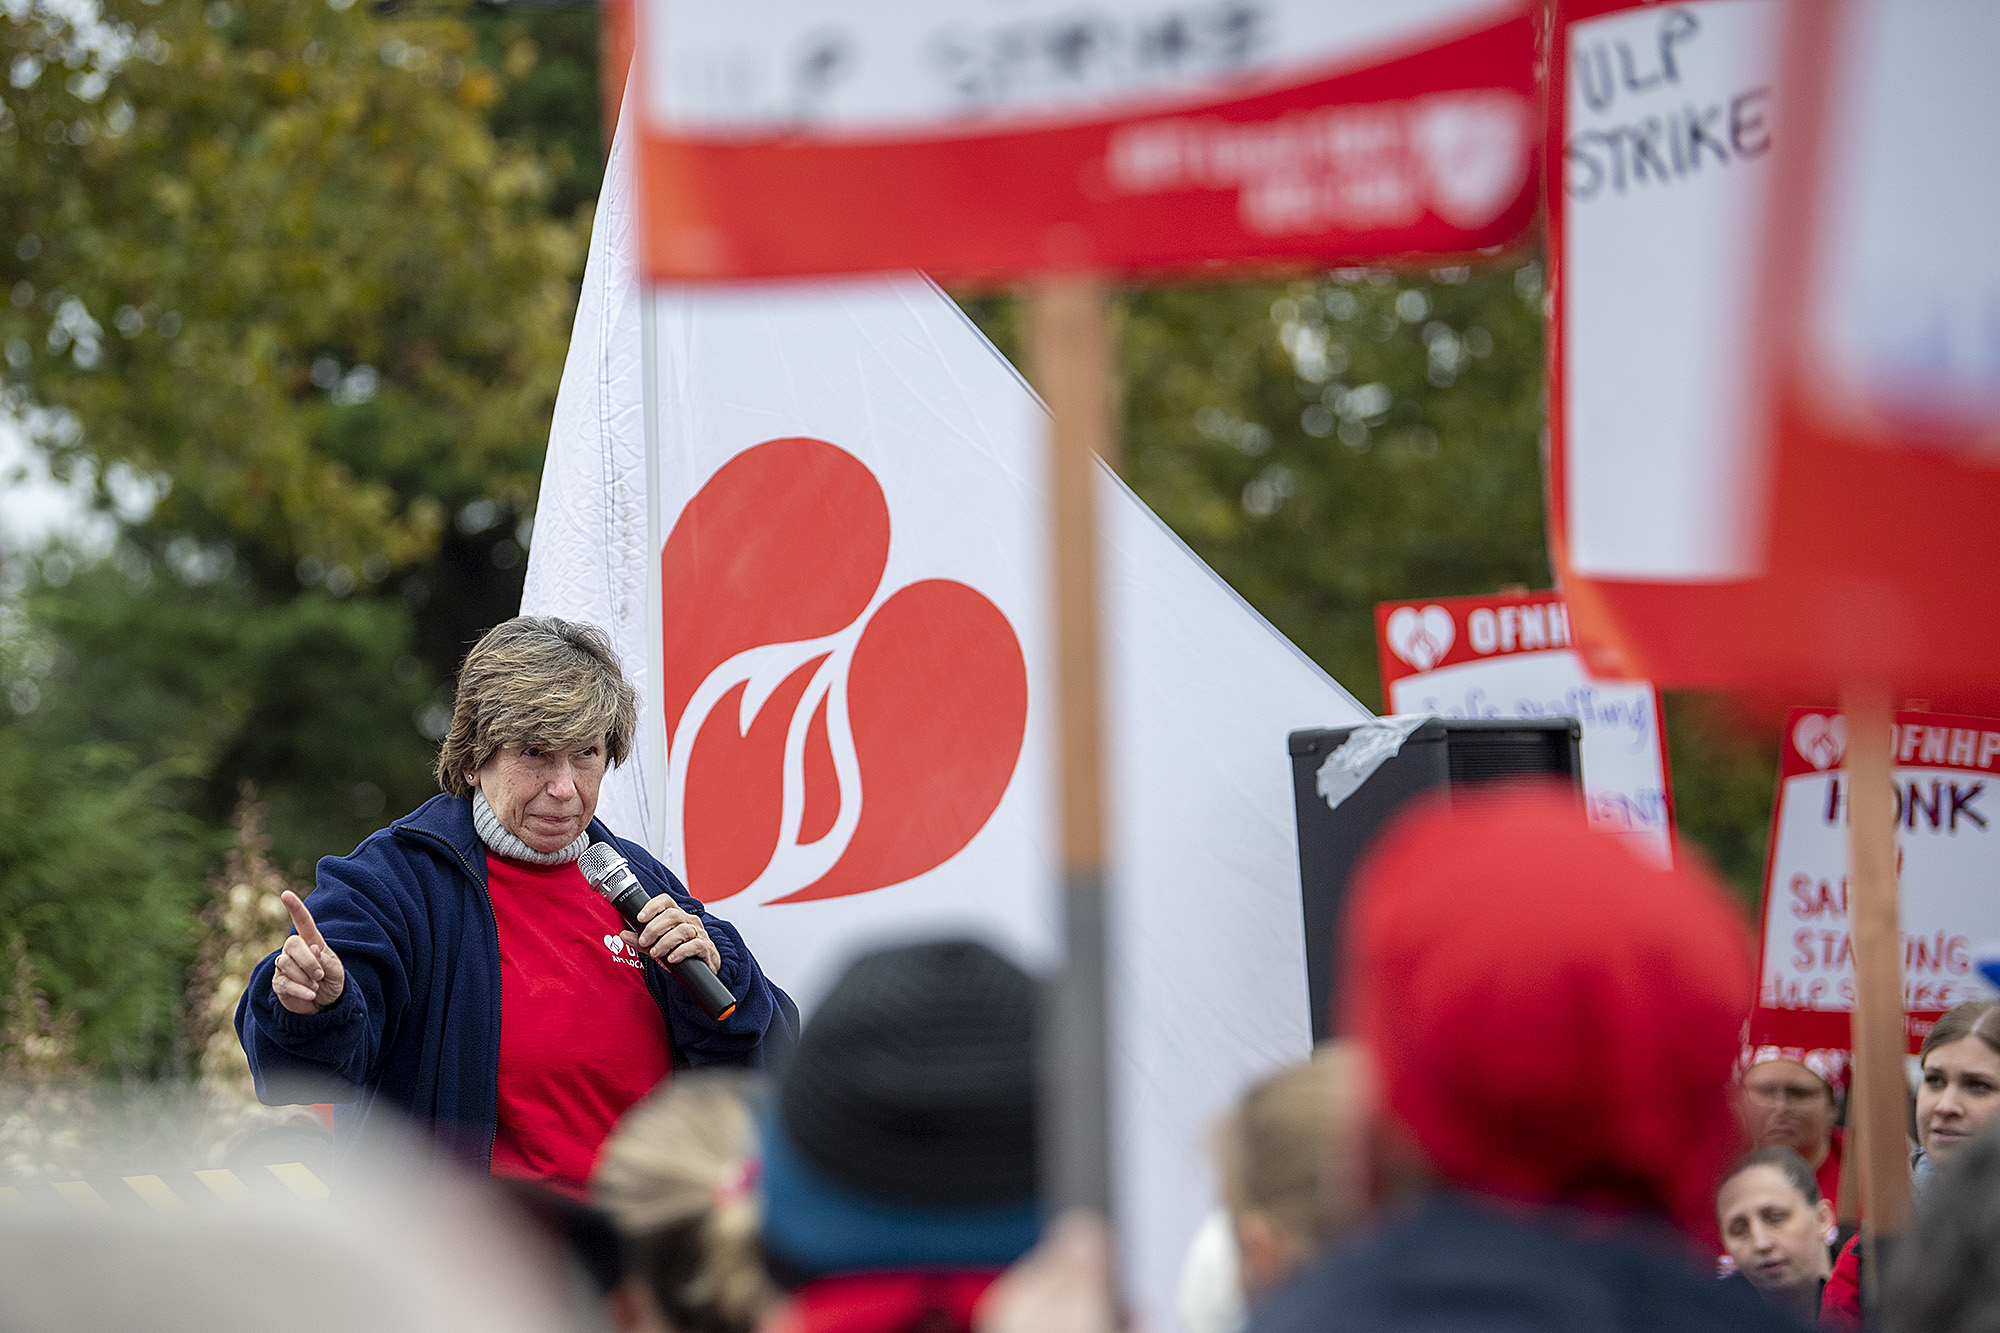 National Union leader joins strike at PeaceHealth photo gallery